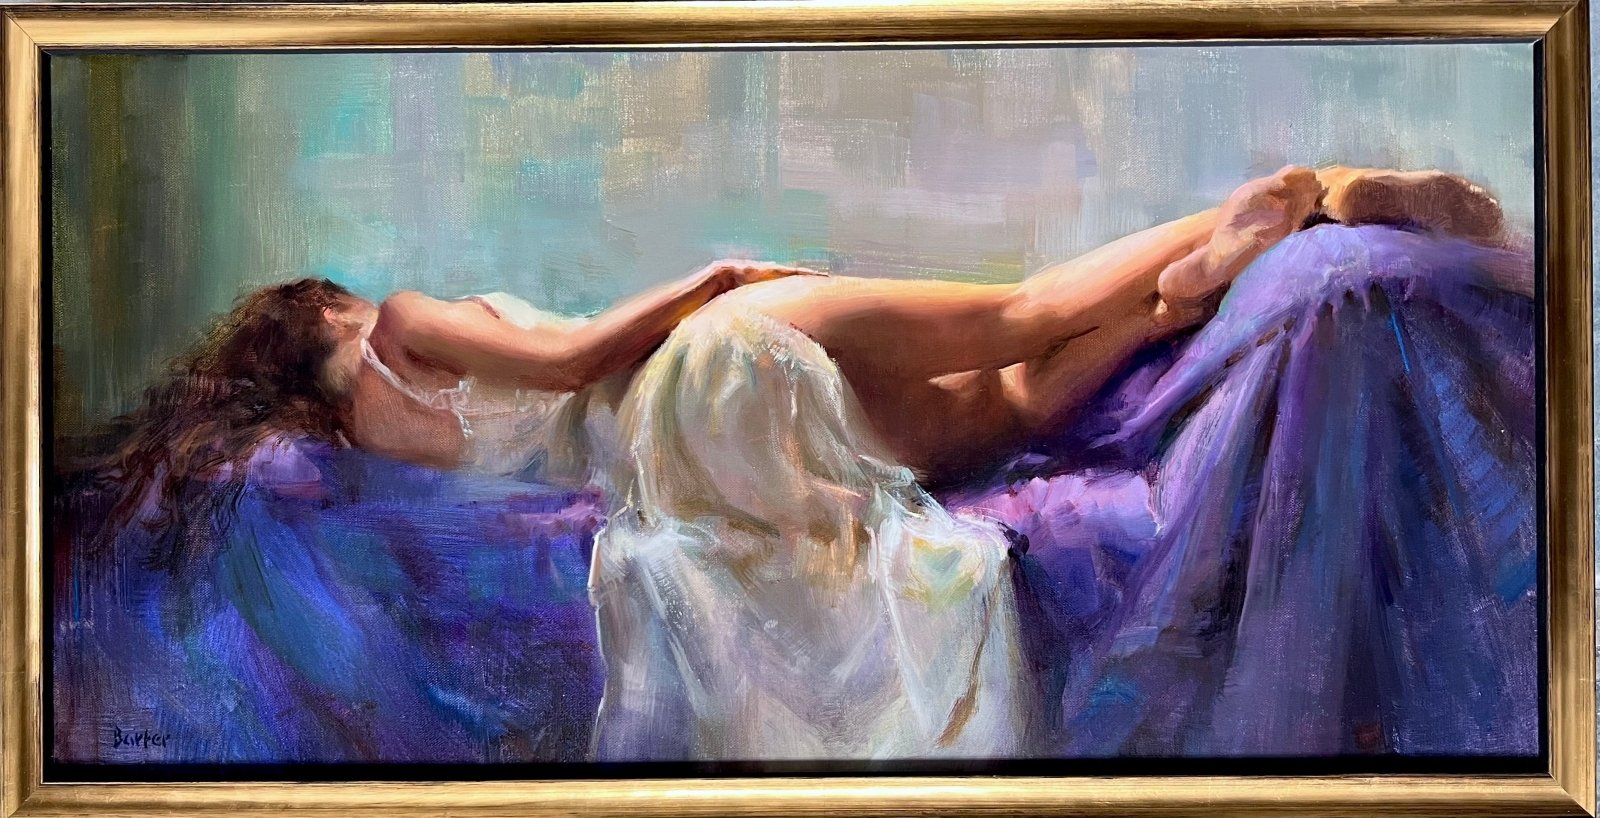 Caressing the Curves by Stacy Barter at LePrince Galleries